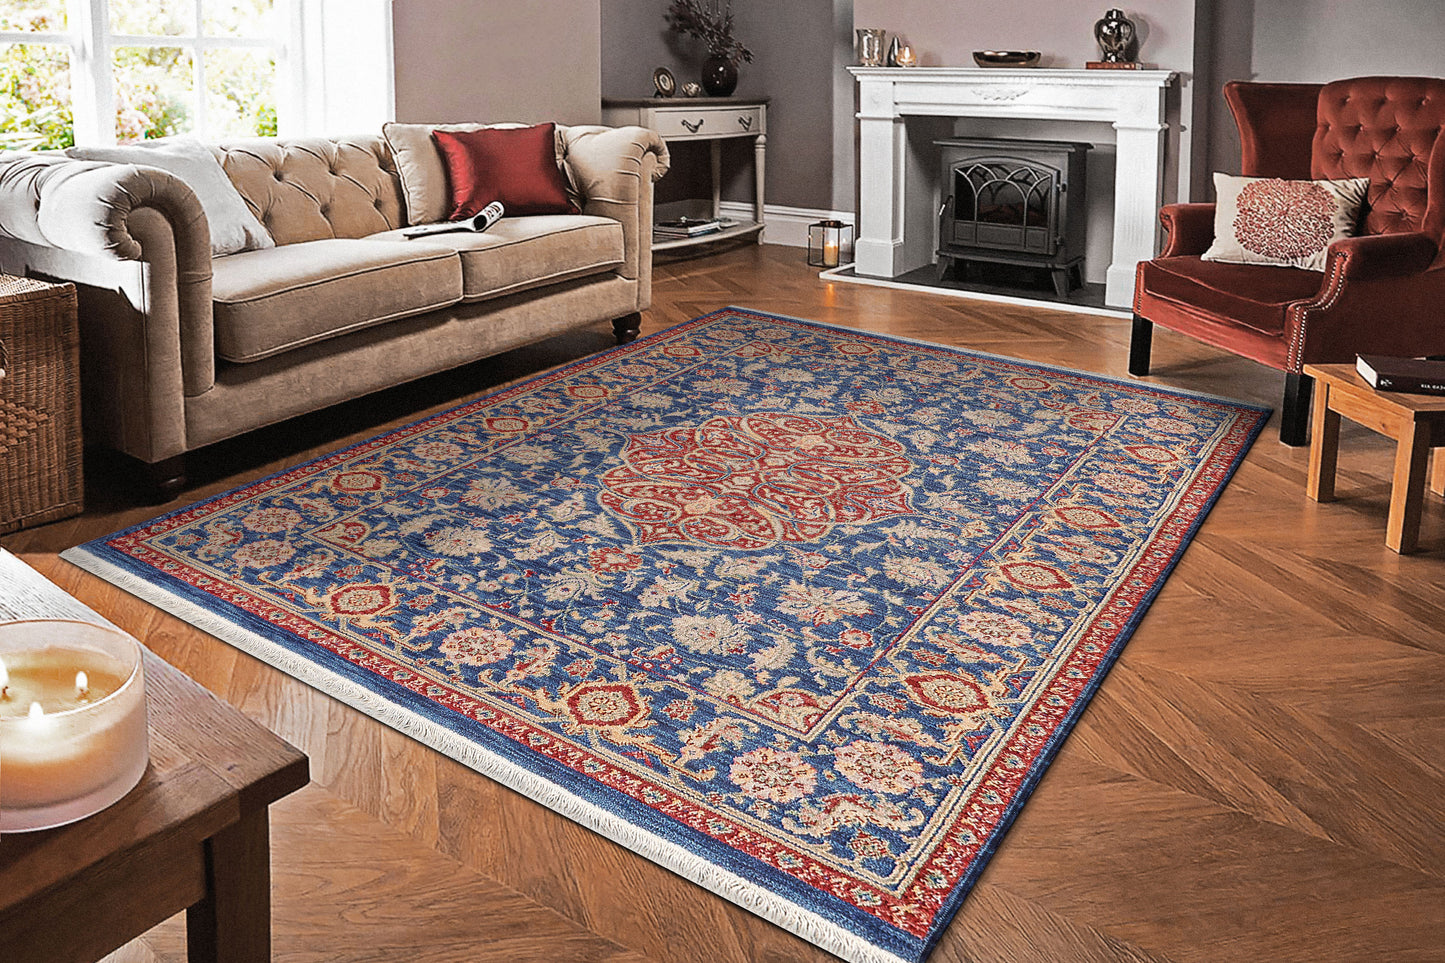 Wade 18607-539 Navy/Red/Multi Area Rug